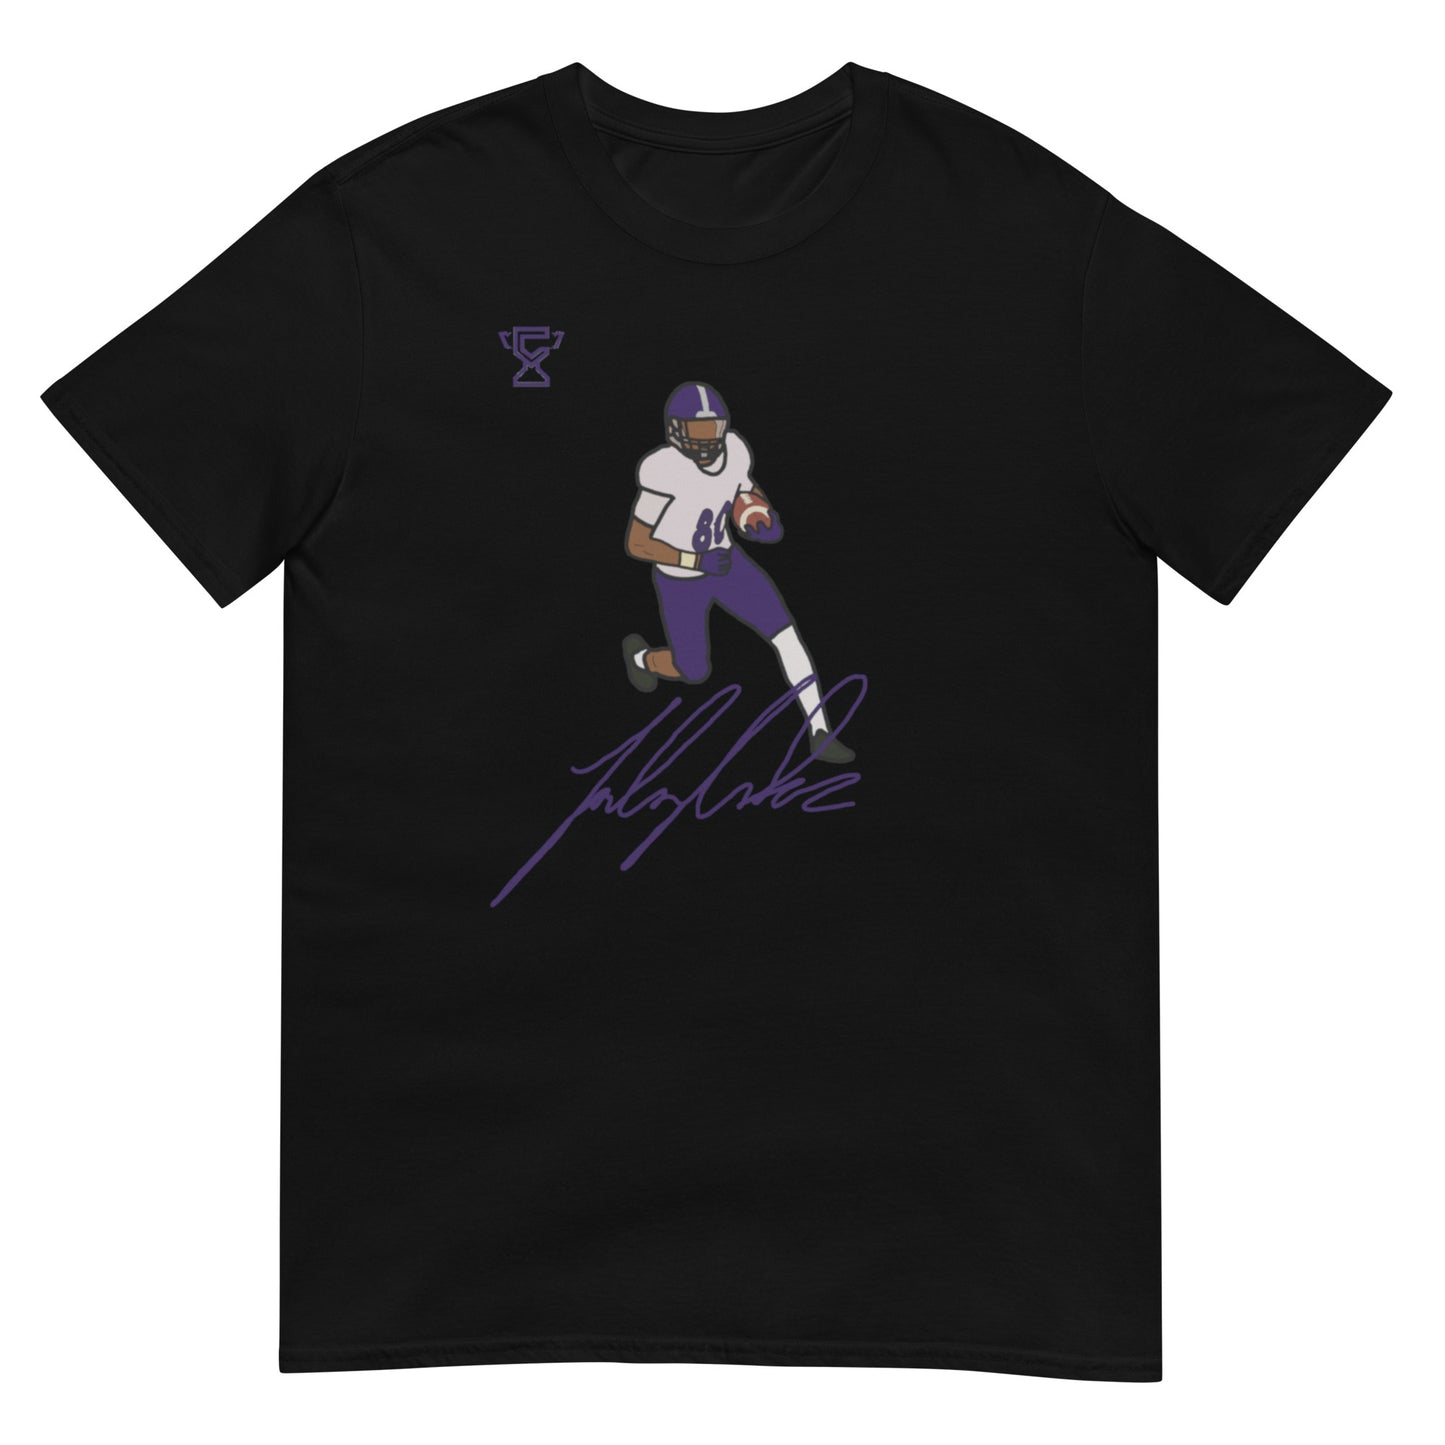 Black t-shirt with the signature and artwork of Jalen Coker along with the Champletes logo.